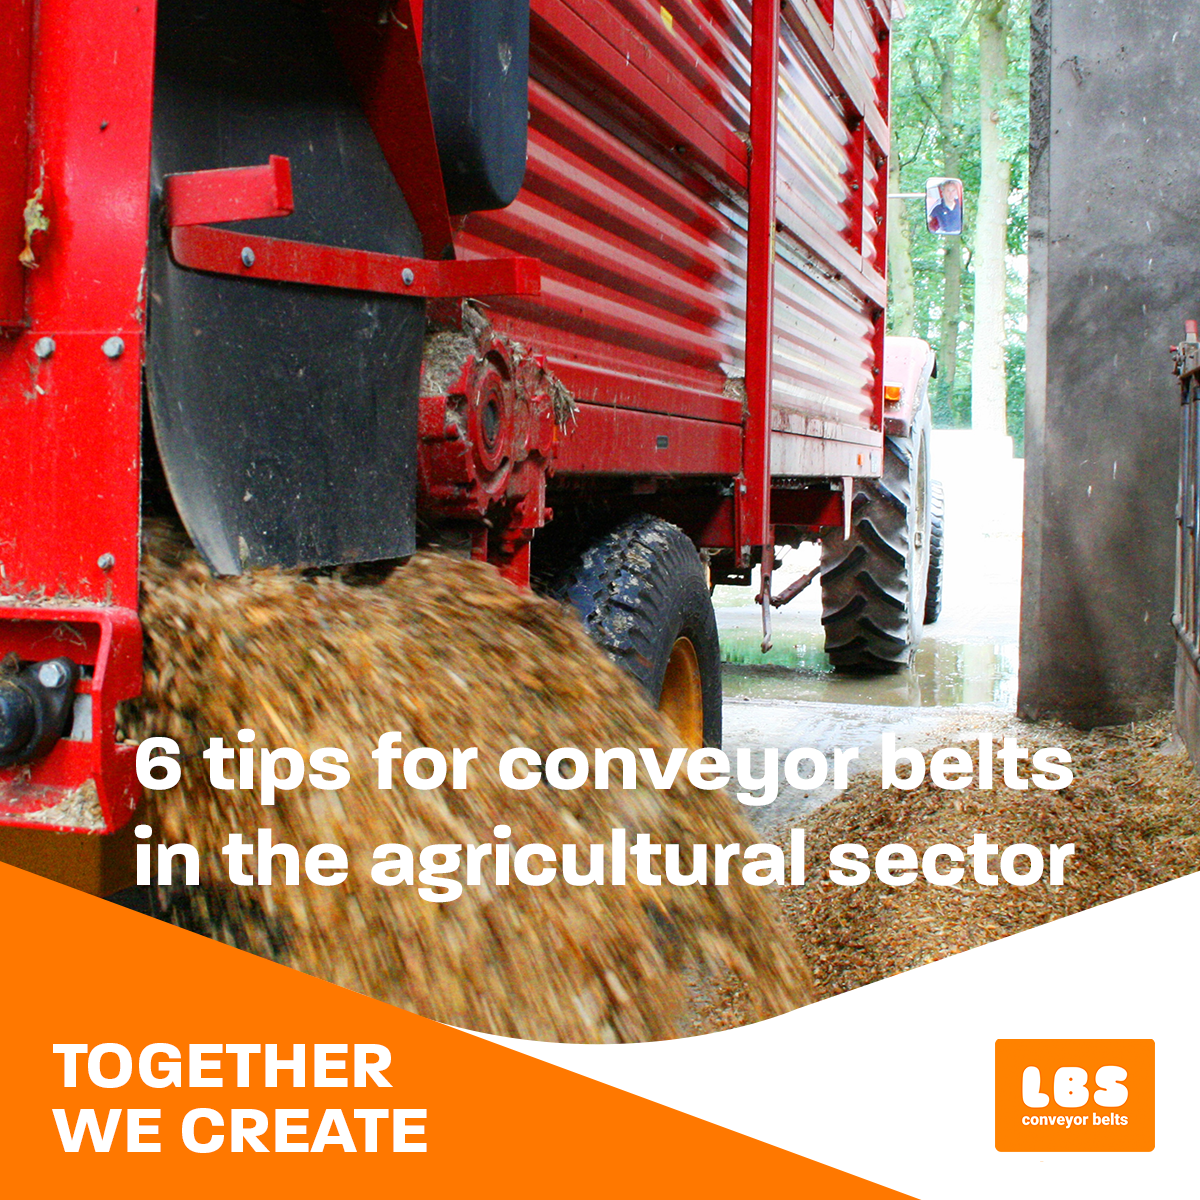 6 tips for conveyor belts in the agricultural sector